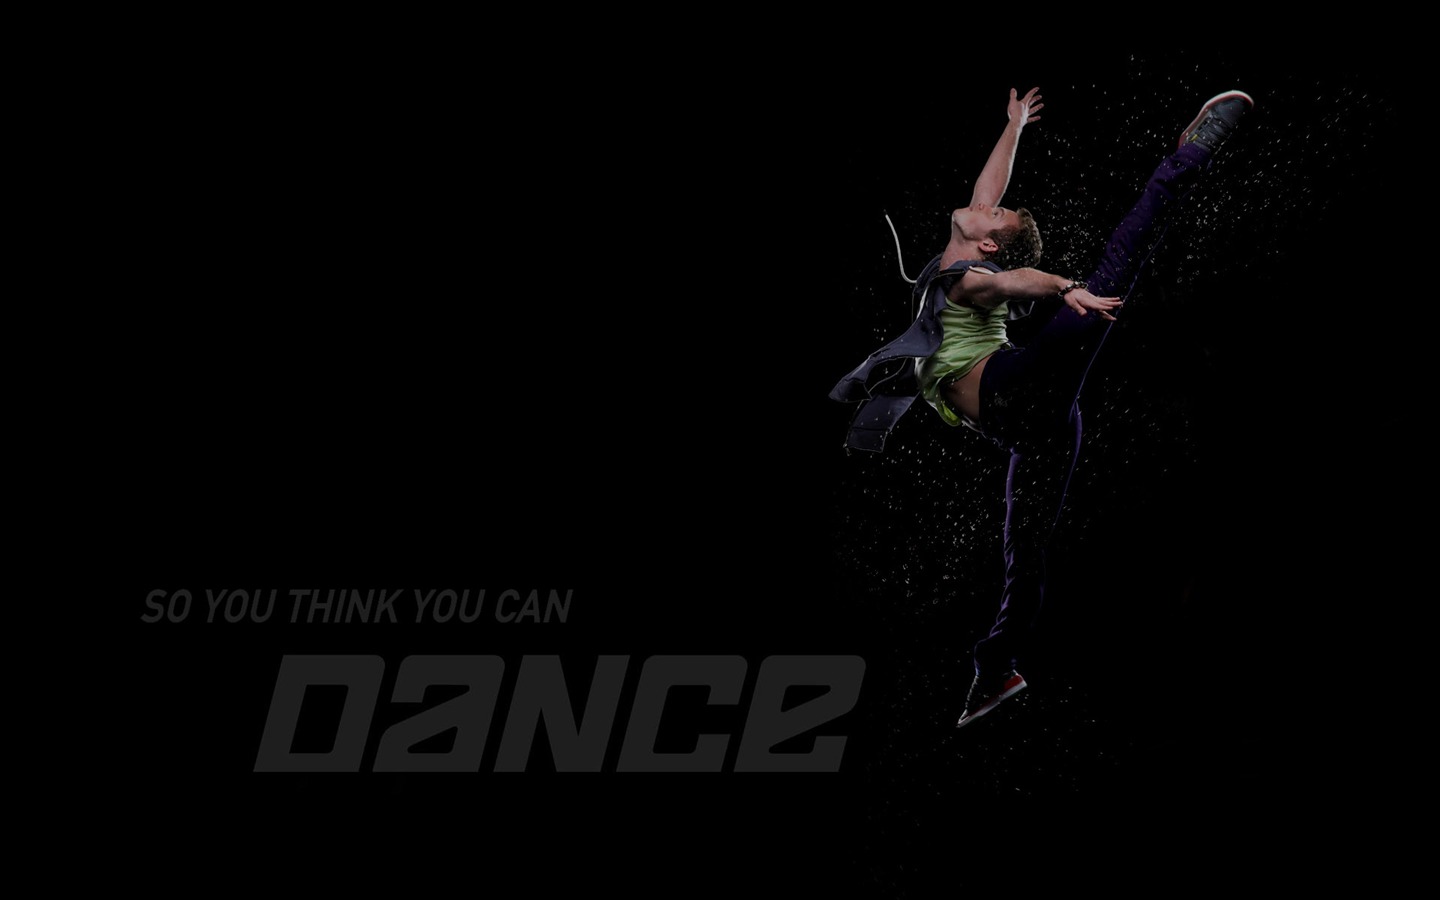 So You Think You Can Dance 舞林爭霸壁紙(二) #8 - 1440x900